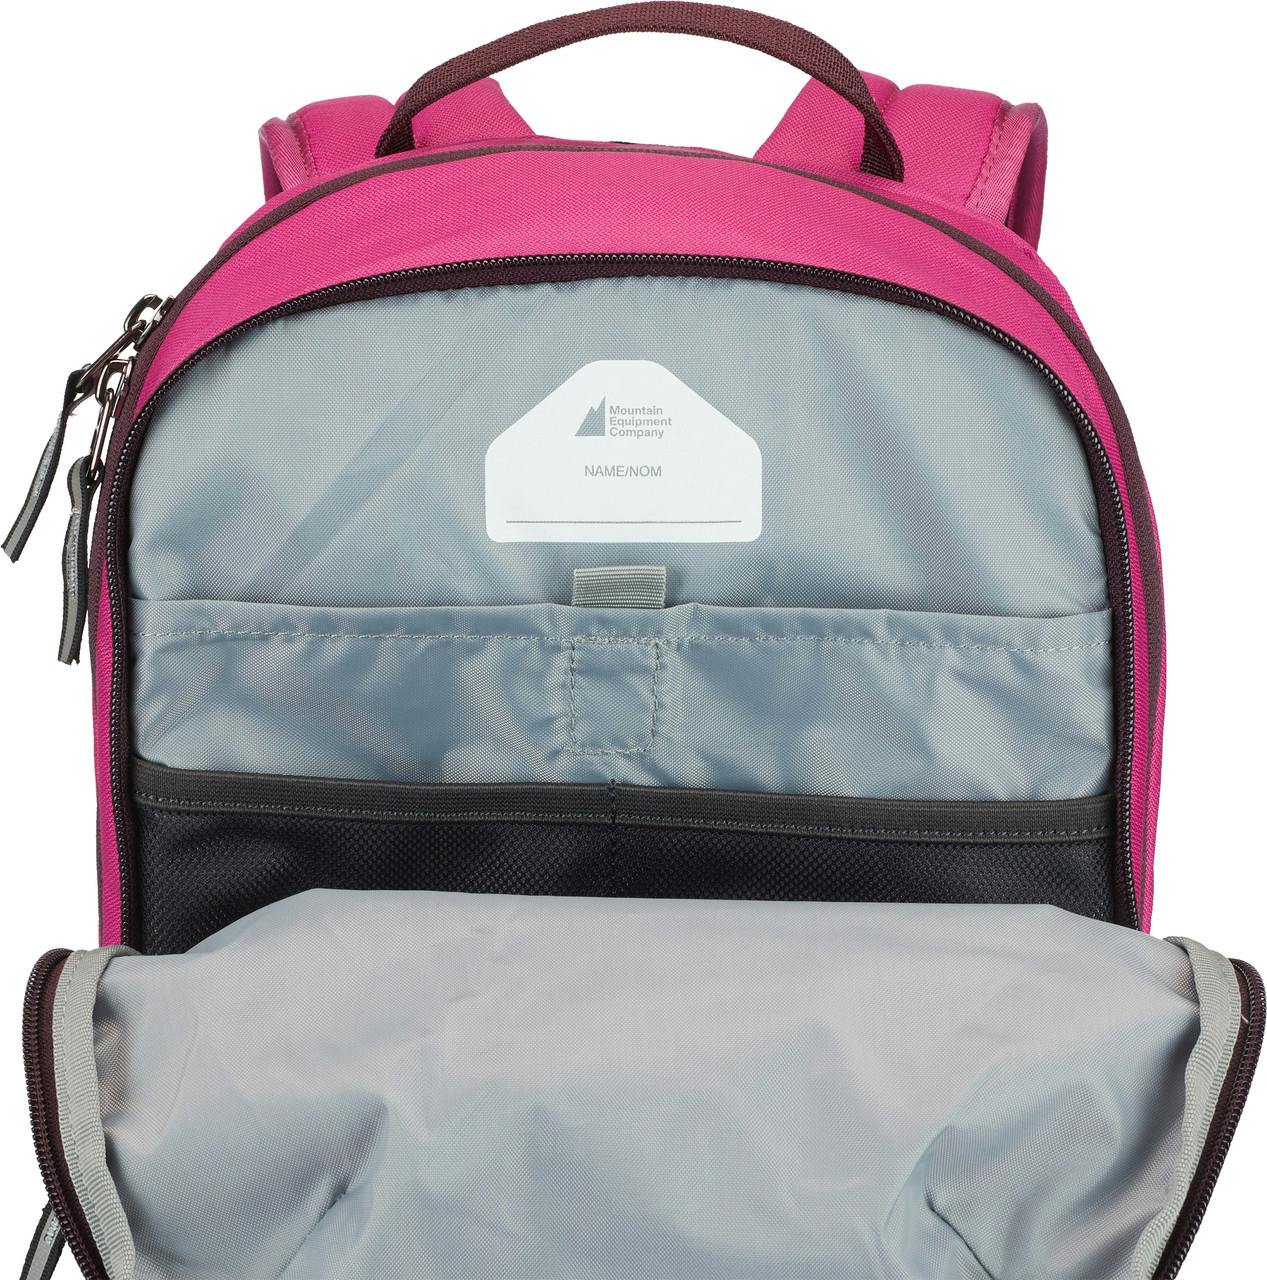 Cub Daypack Passion Pink/Plum Perfect